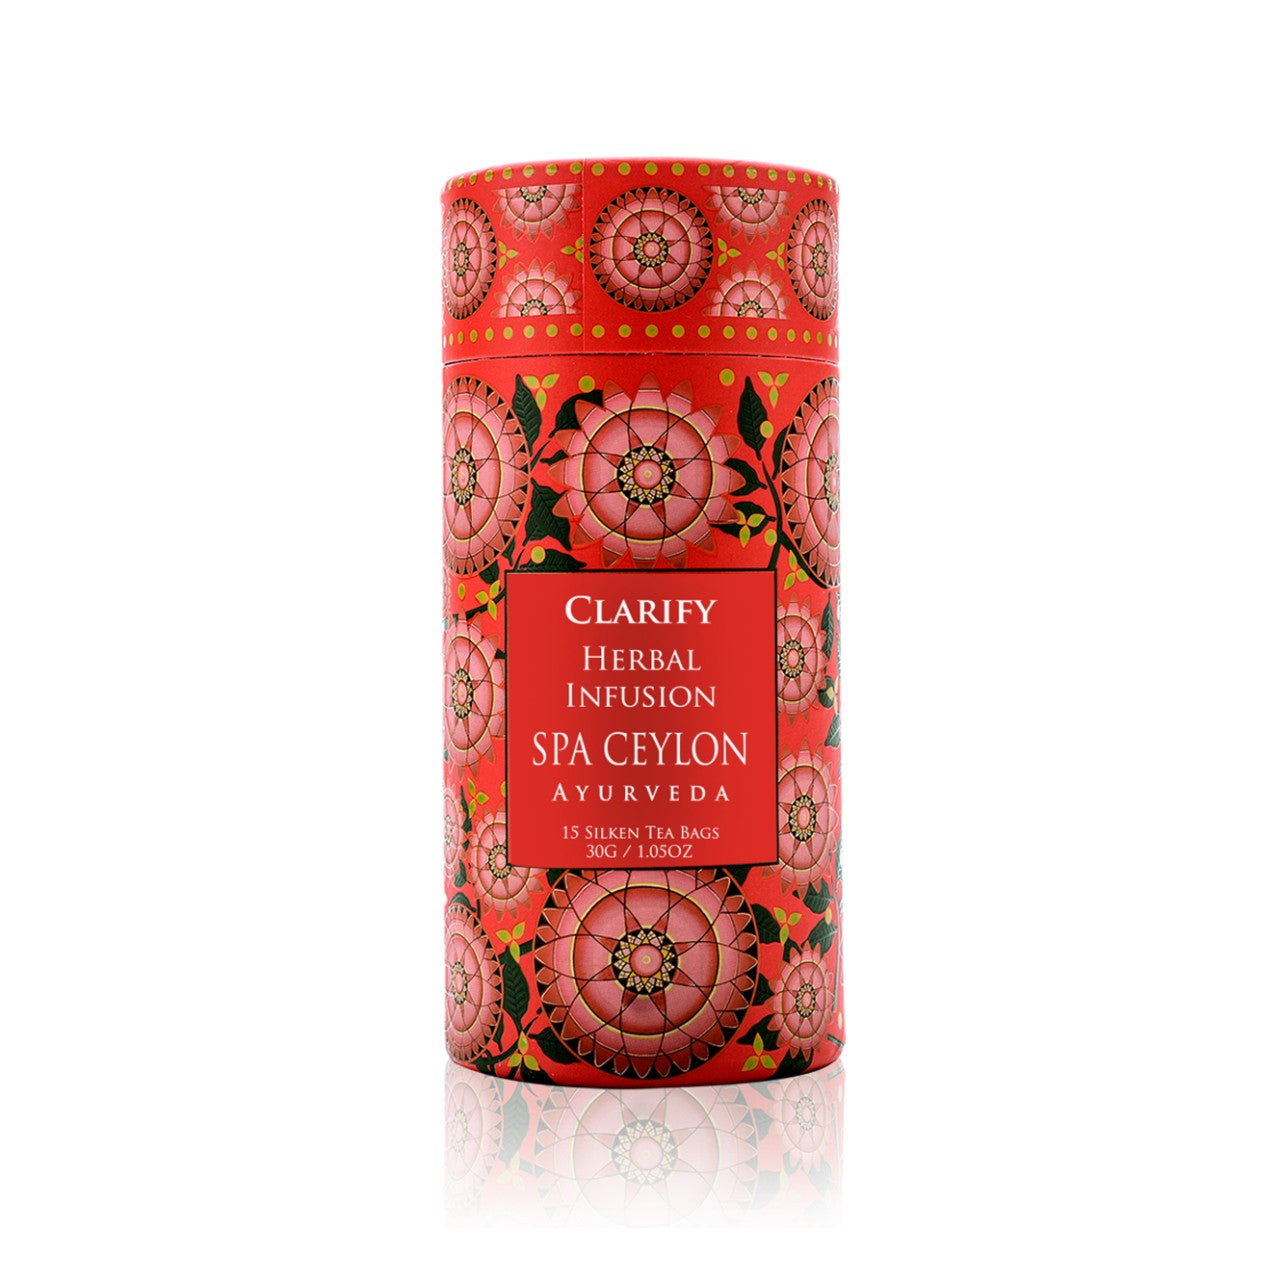 CLARIFY - Herbal Infusion